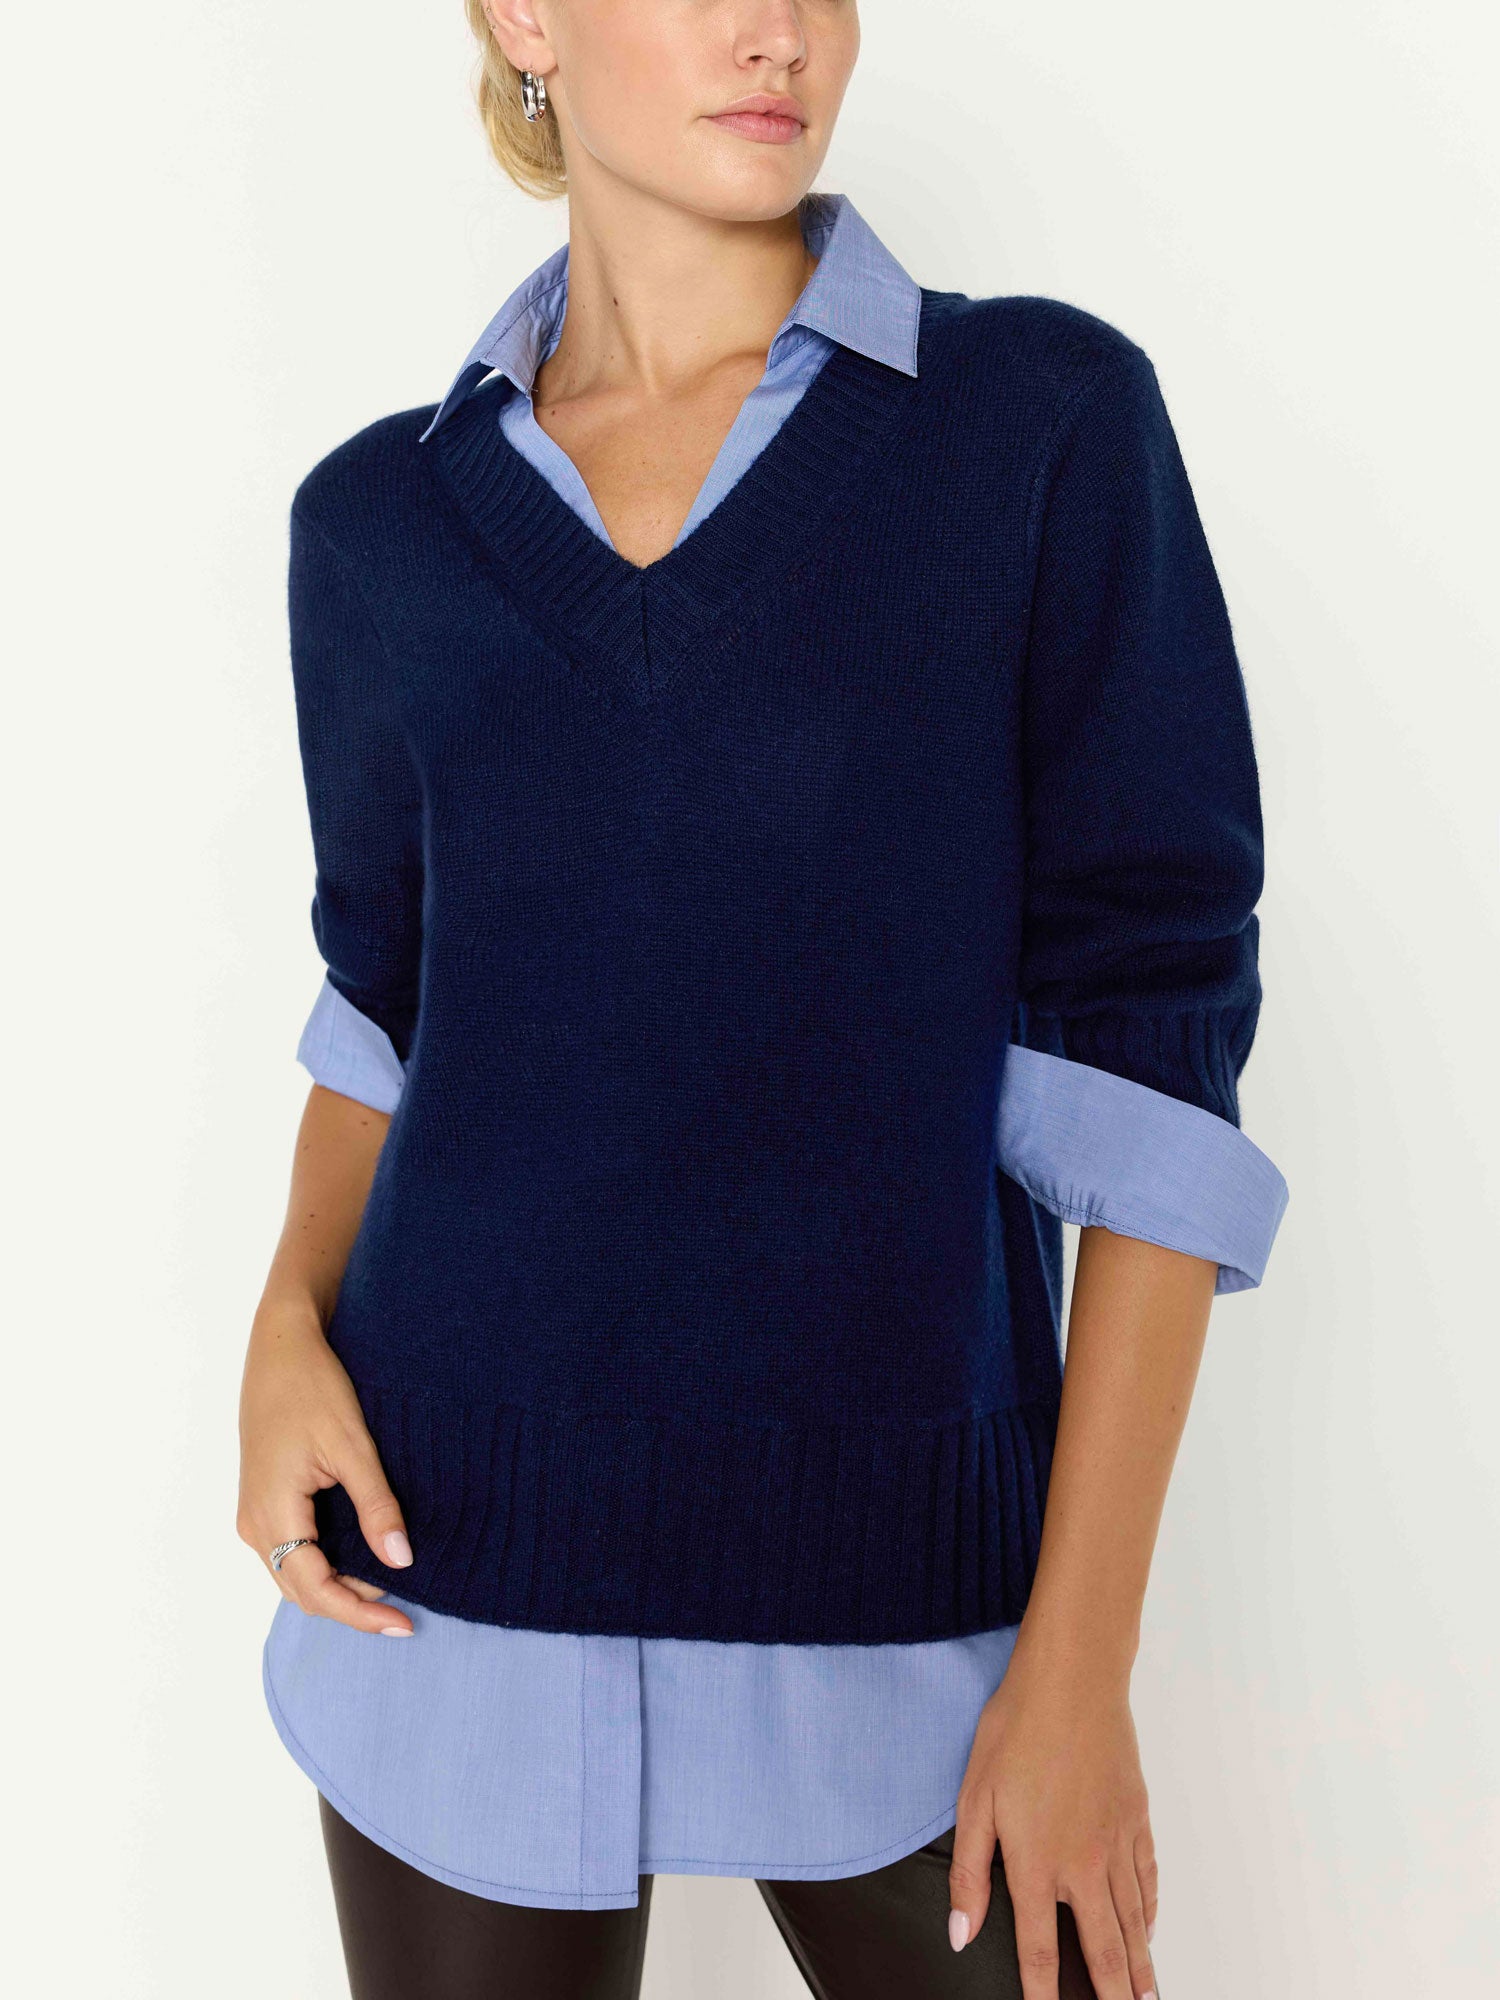 Arden navy blue oxford layered v-neck sweater front view 3